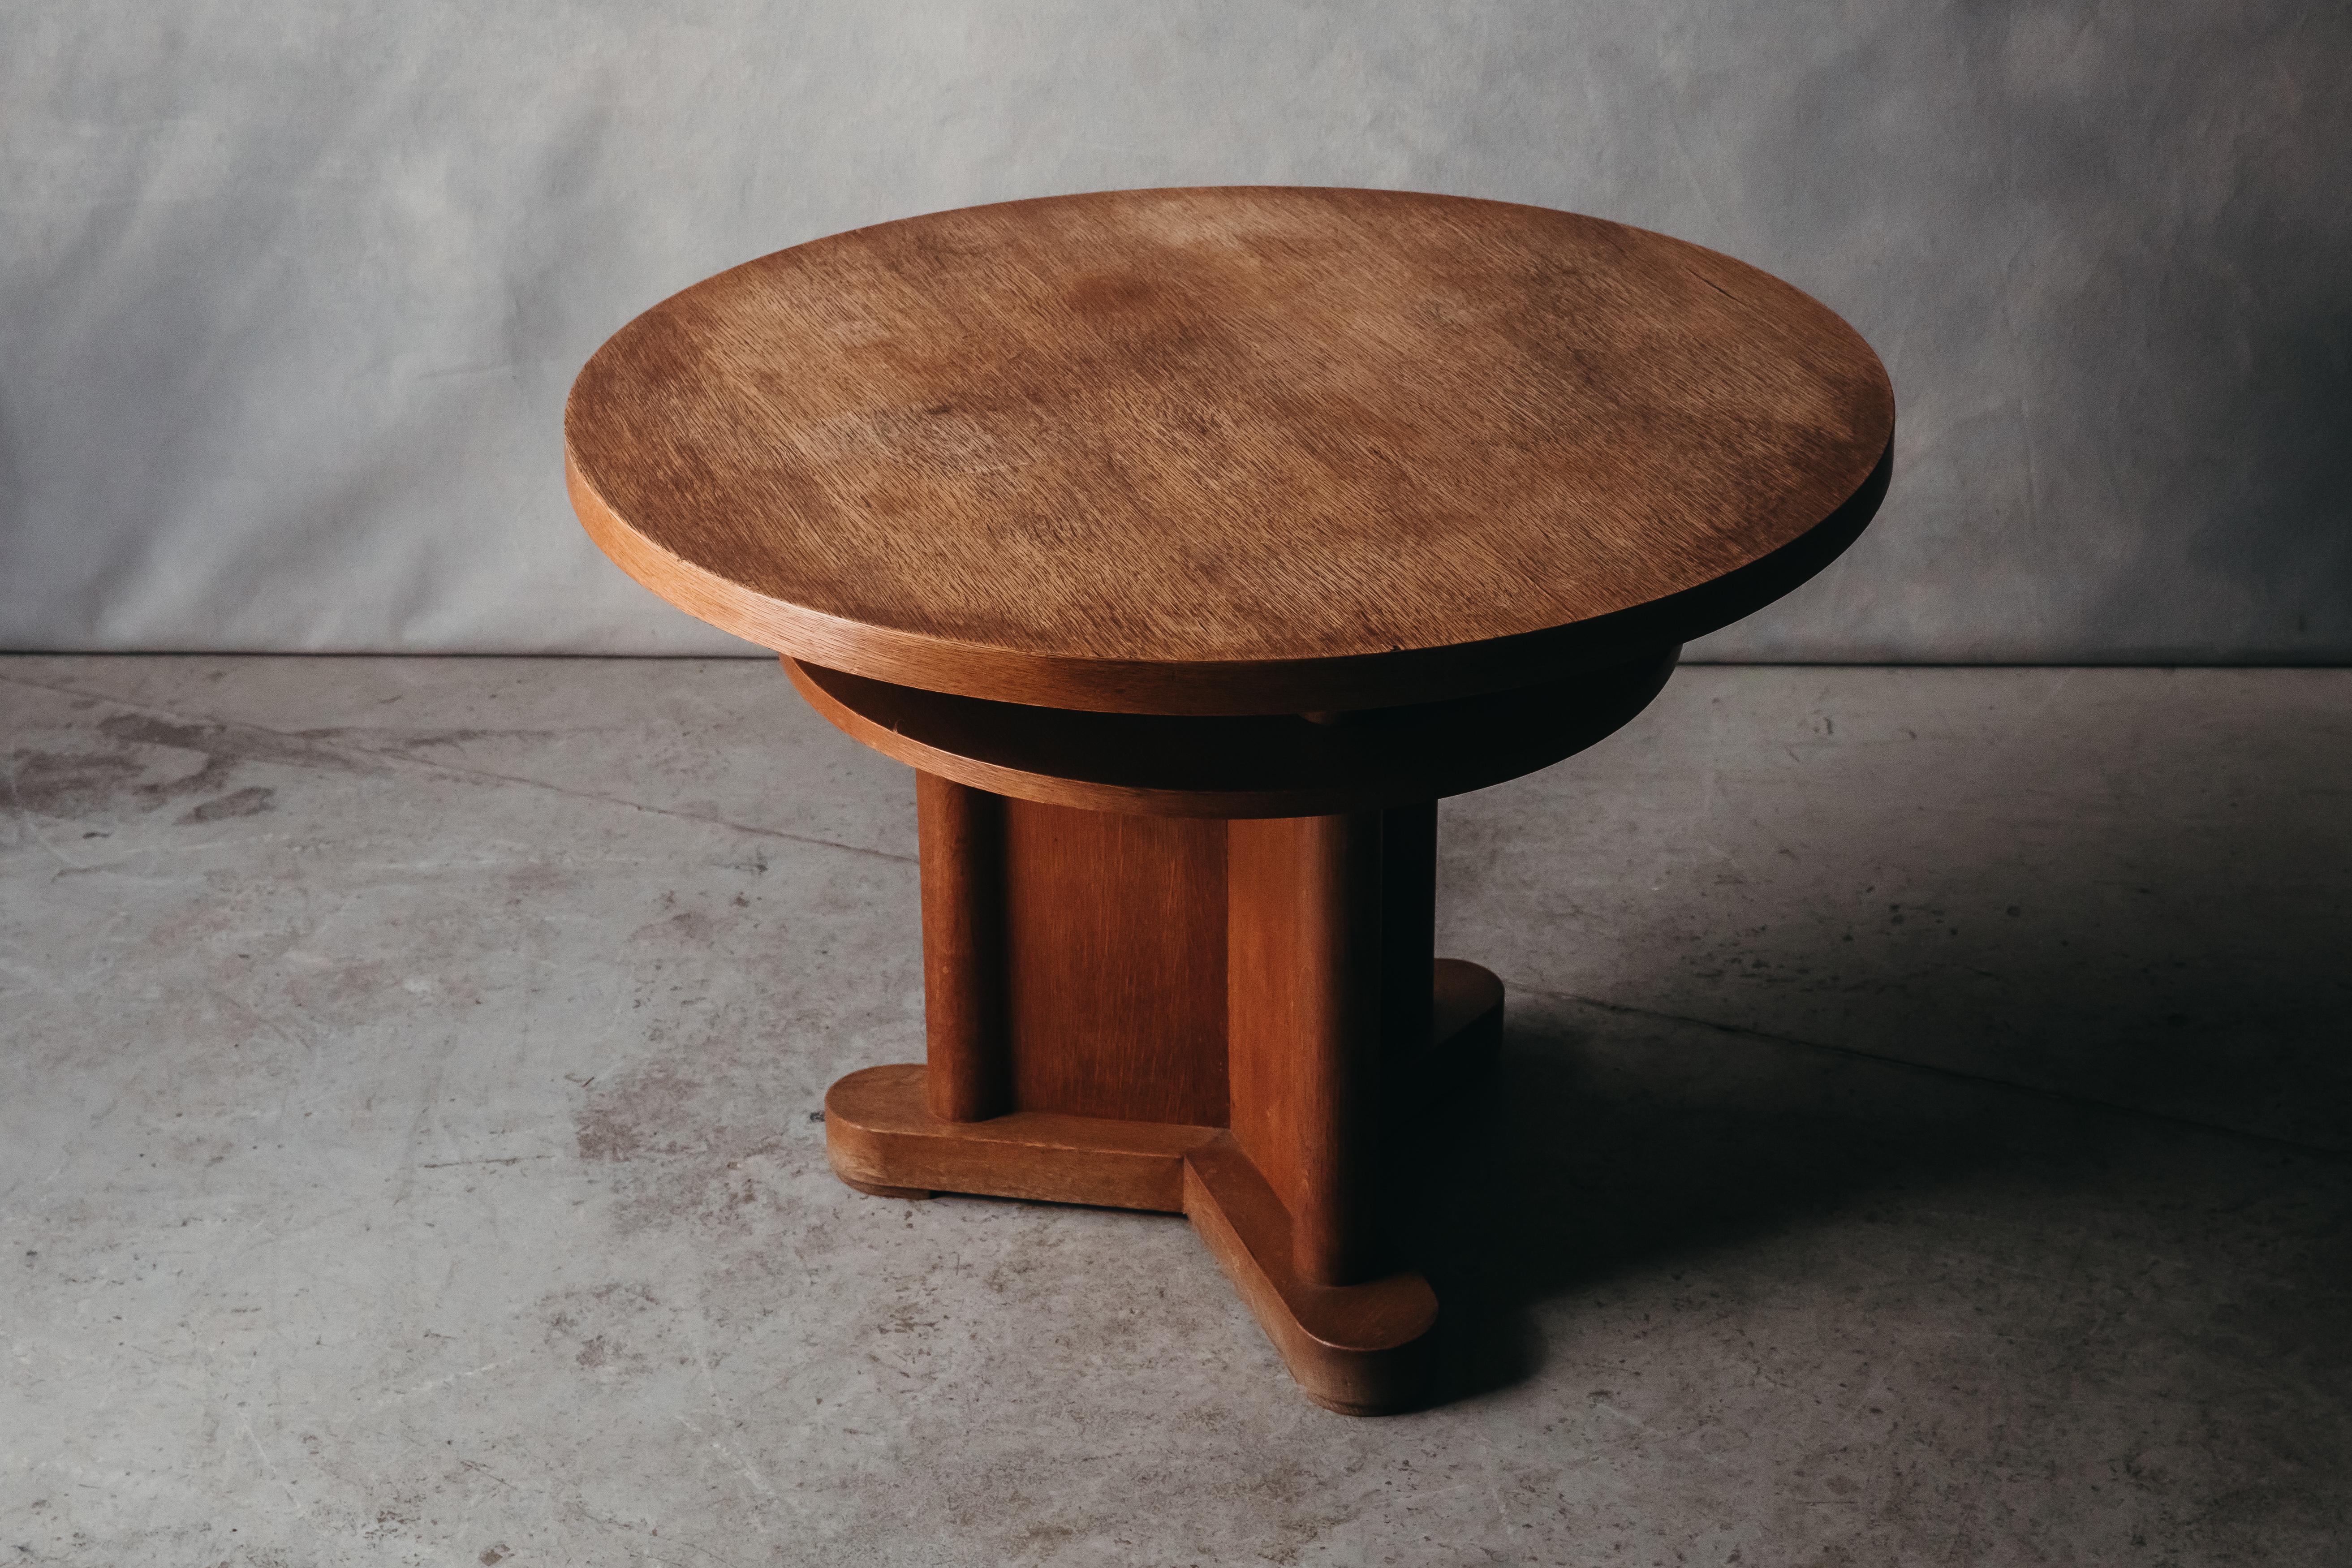 Vintage Art Deco Side Table From France, circa 1960. Solid oak construction with light wear and use.